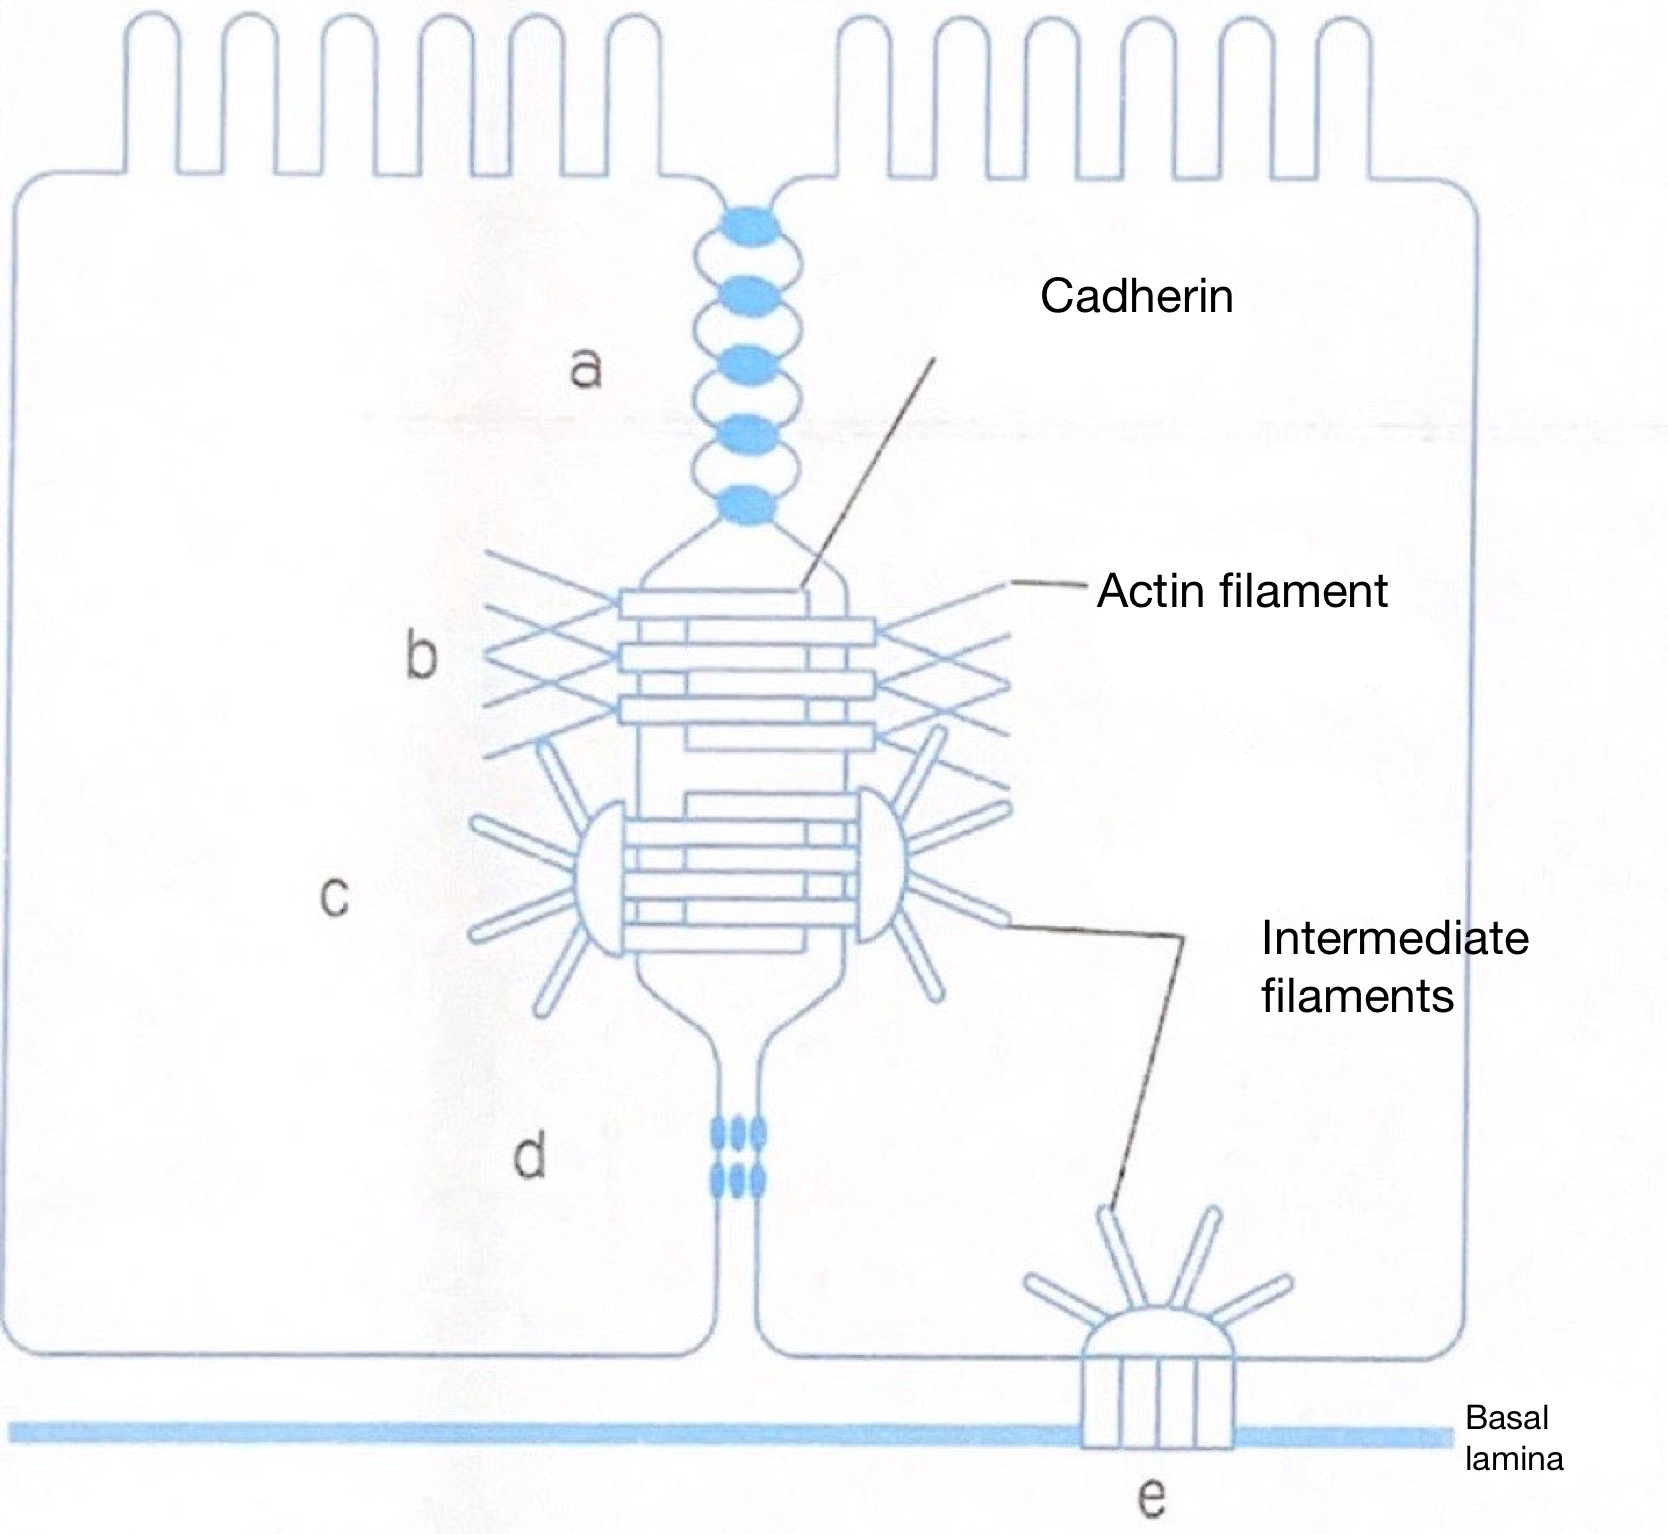 <p>197</p><p>The following shows schematic diagram of endothelial cell.</p><p>Which is the gap junction?</p><p></p><p>a a</p><p>b b</p><p>c c</p><p>d d</p><p>e e</p>